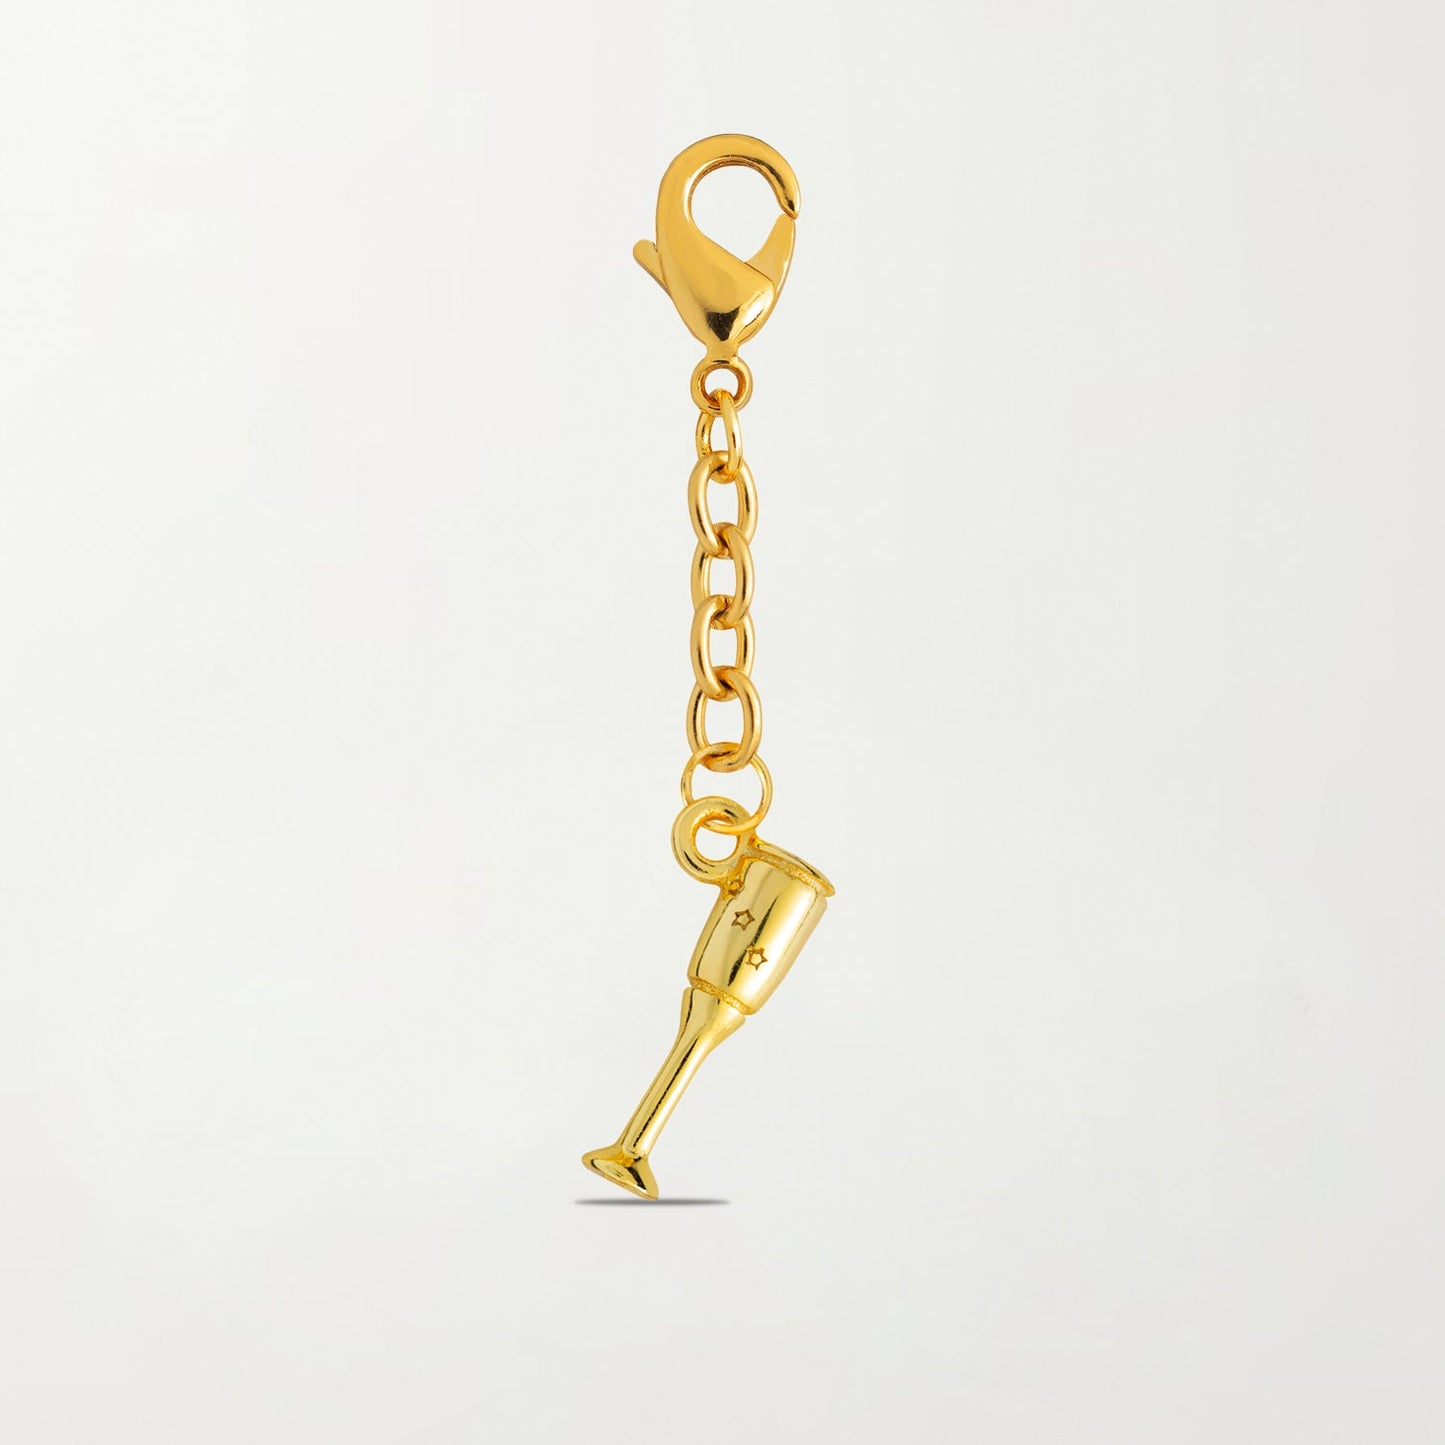 The Champagne Glass Charm